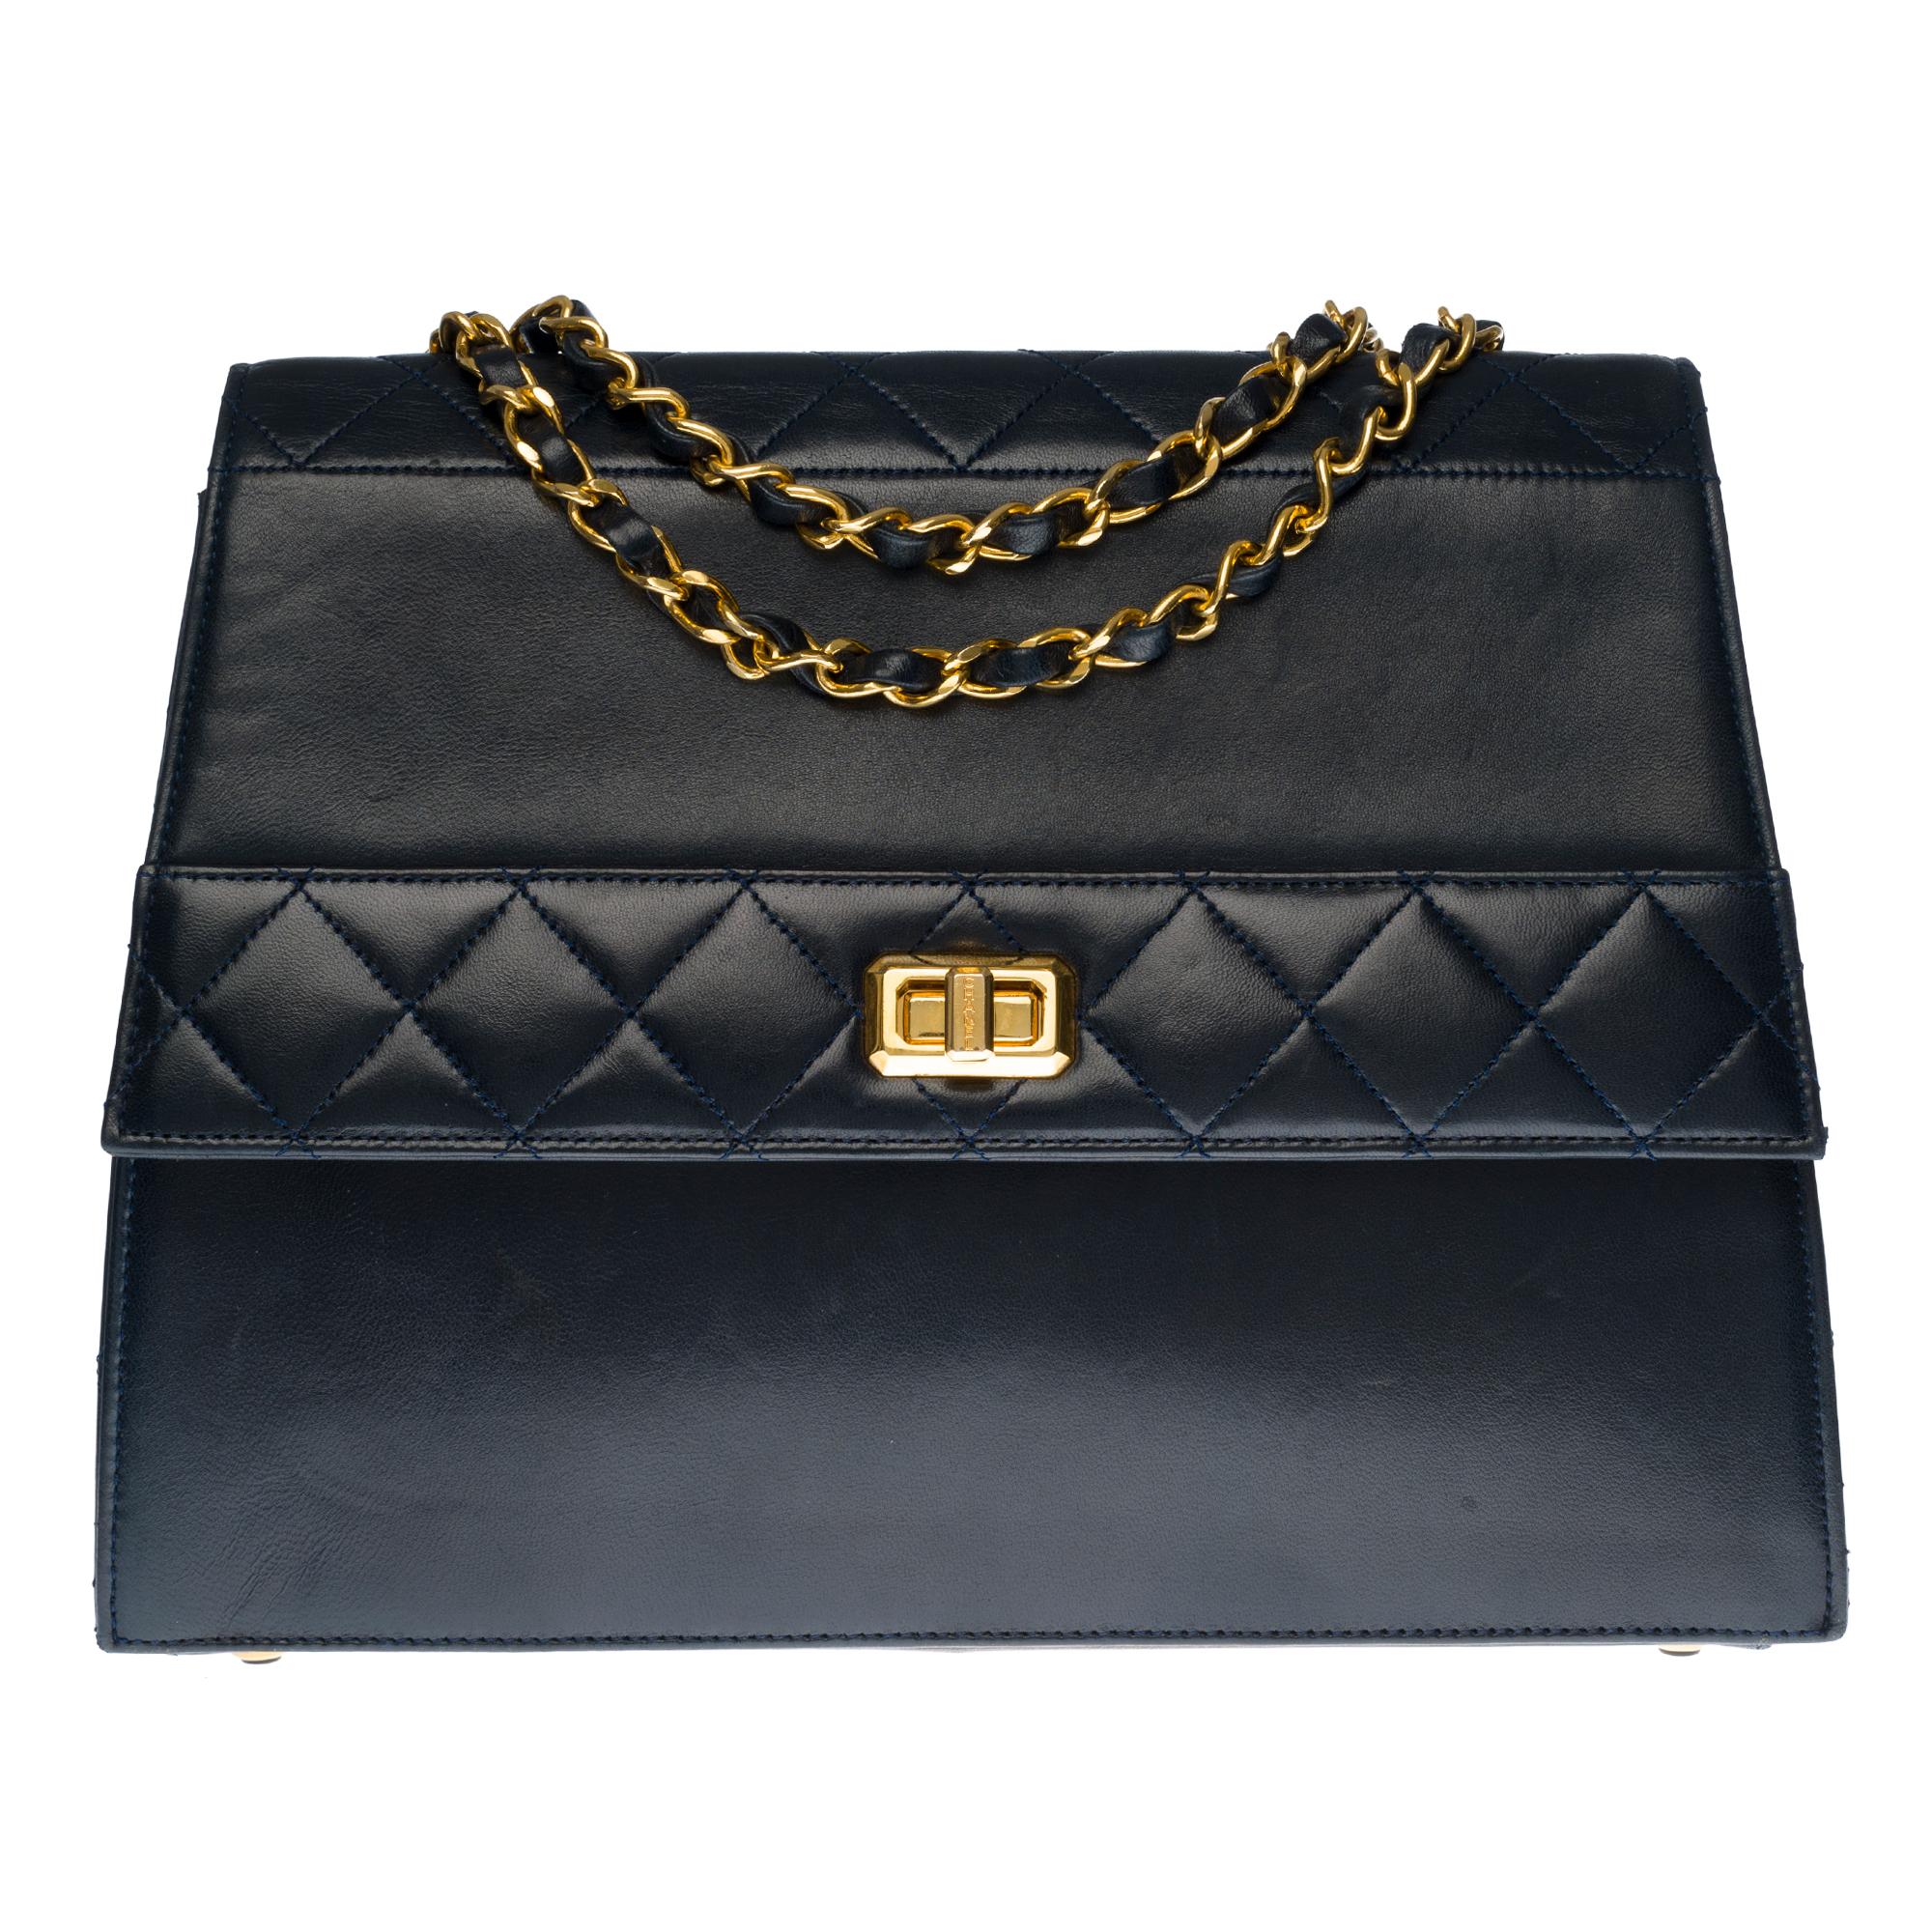 Ultra Rare Chanel Trapeze navy blue shoulder bag and gold hardware